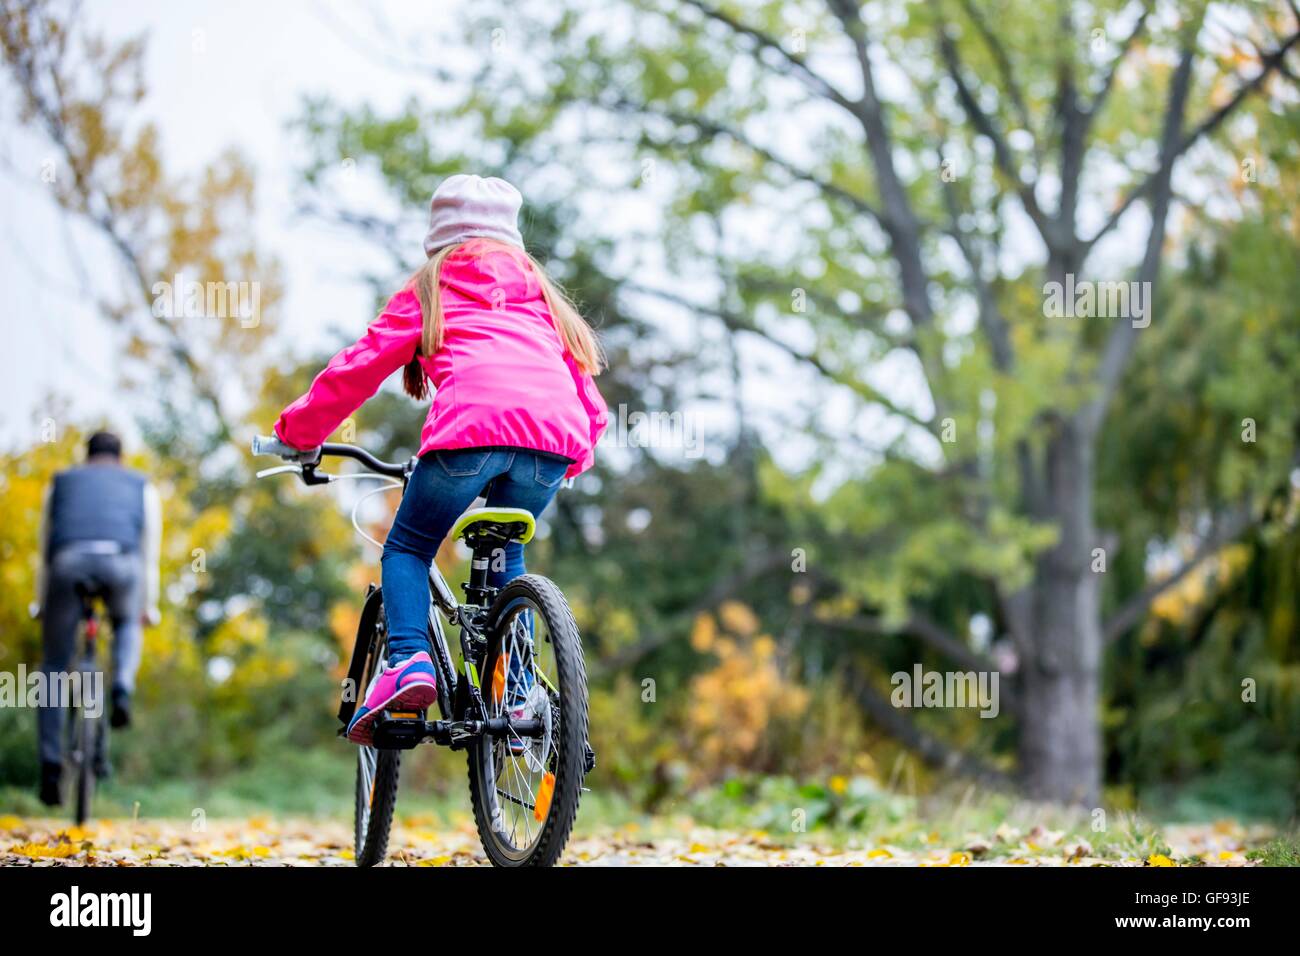 MODEL RELEASED. Rear view of girl cycling in autumn. Stock Photo